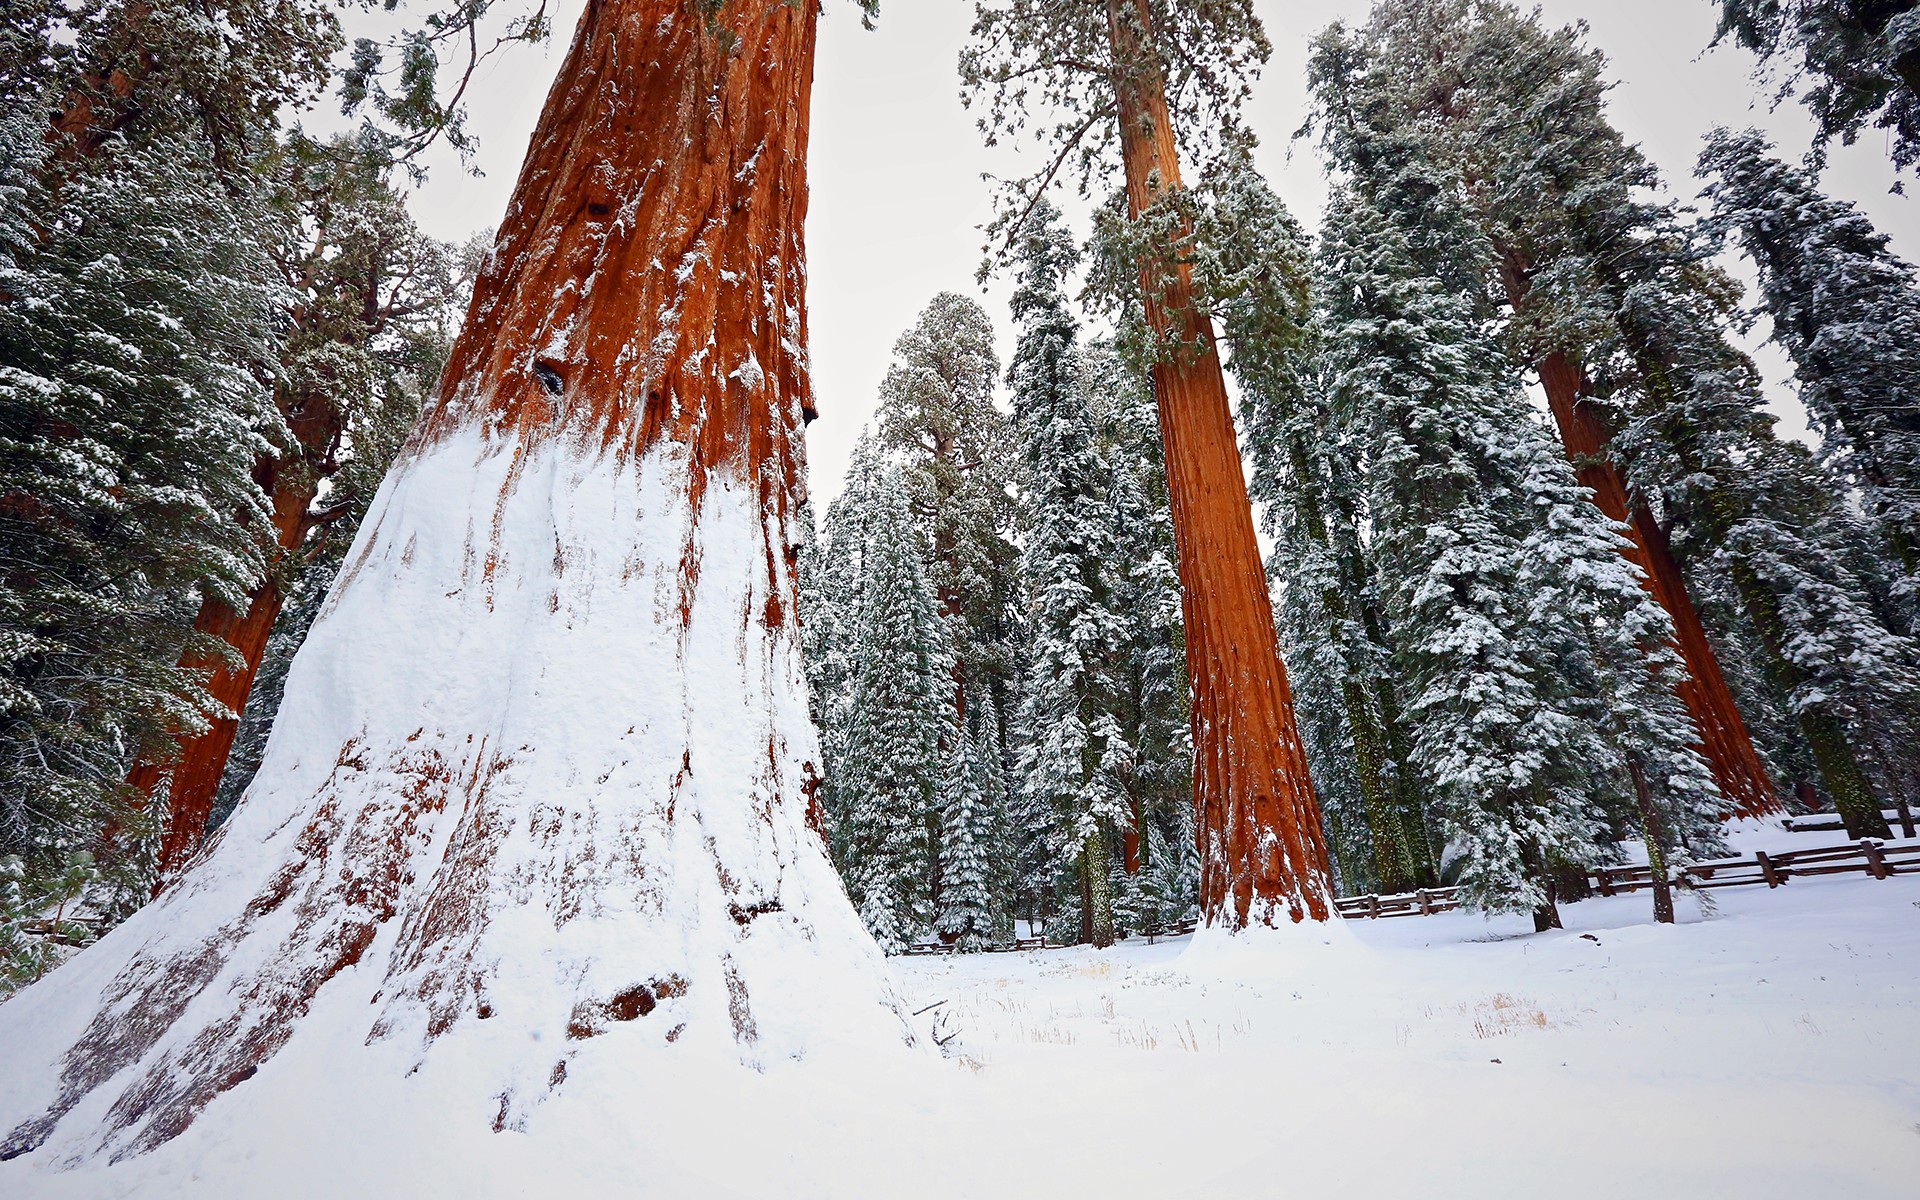 General 1920x1200 redwood snow trees winter nature forest cold outdoors